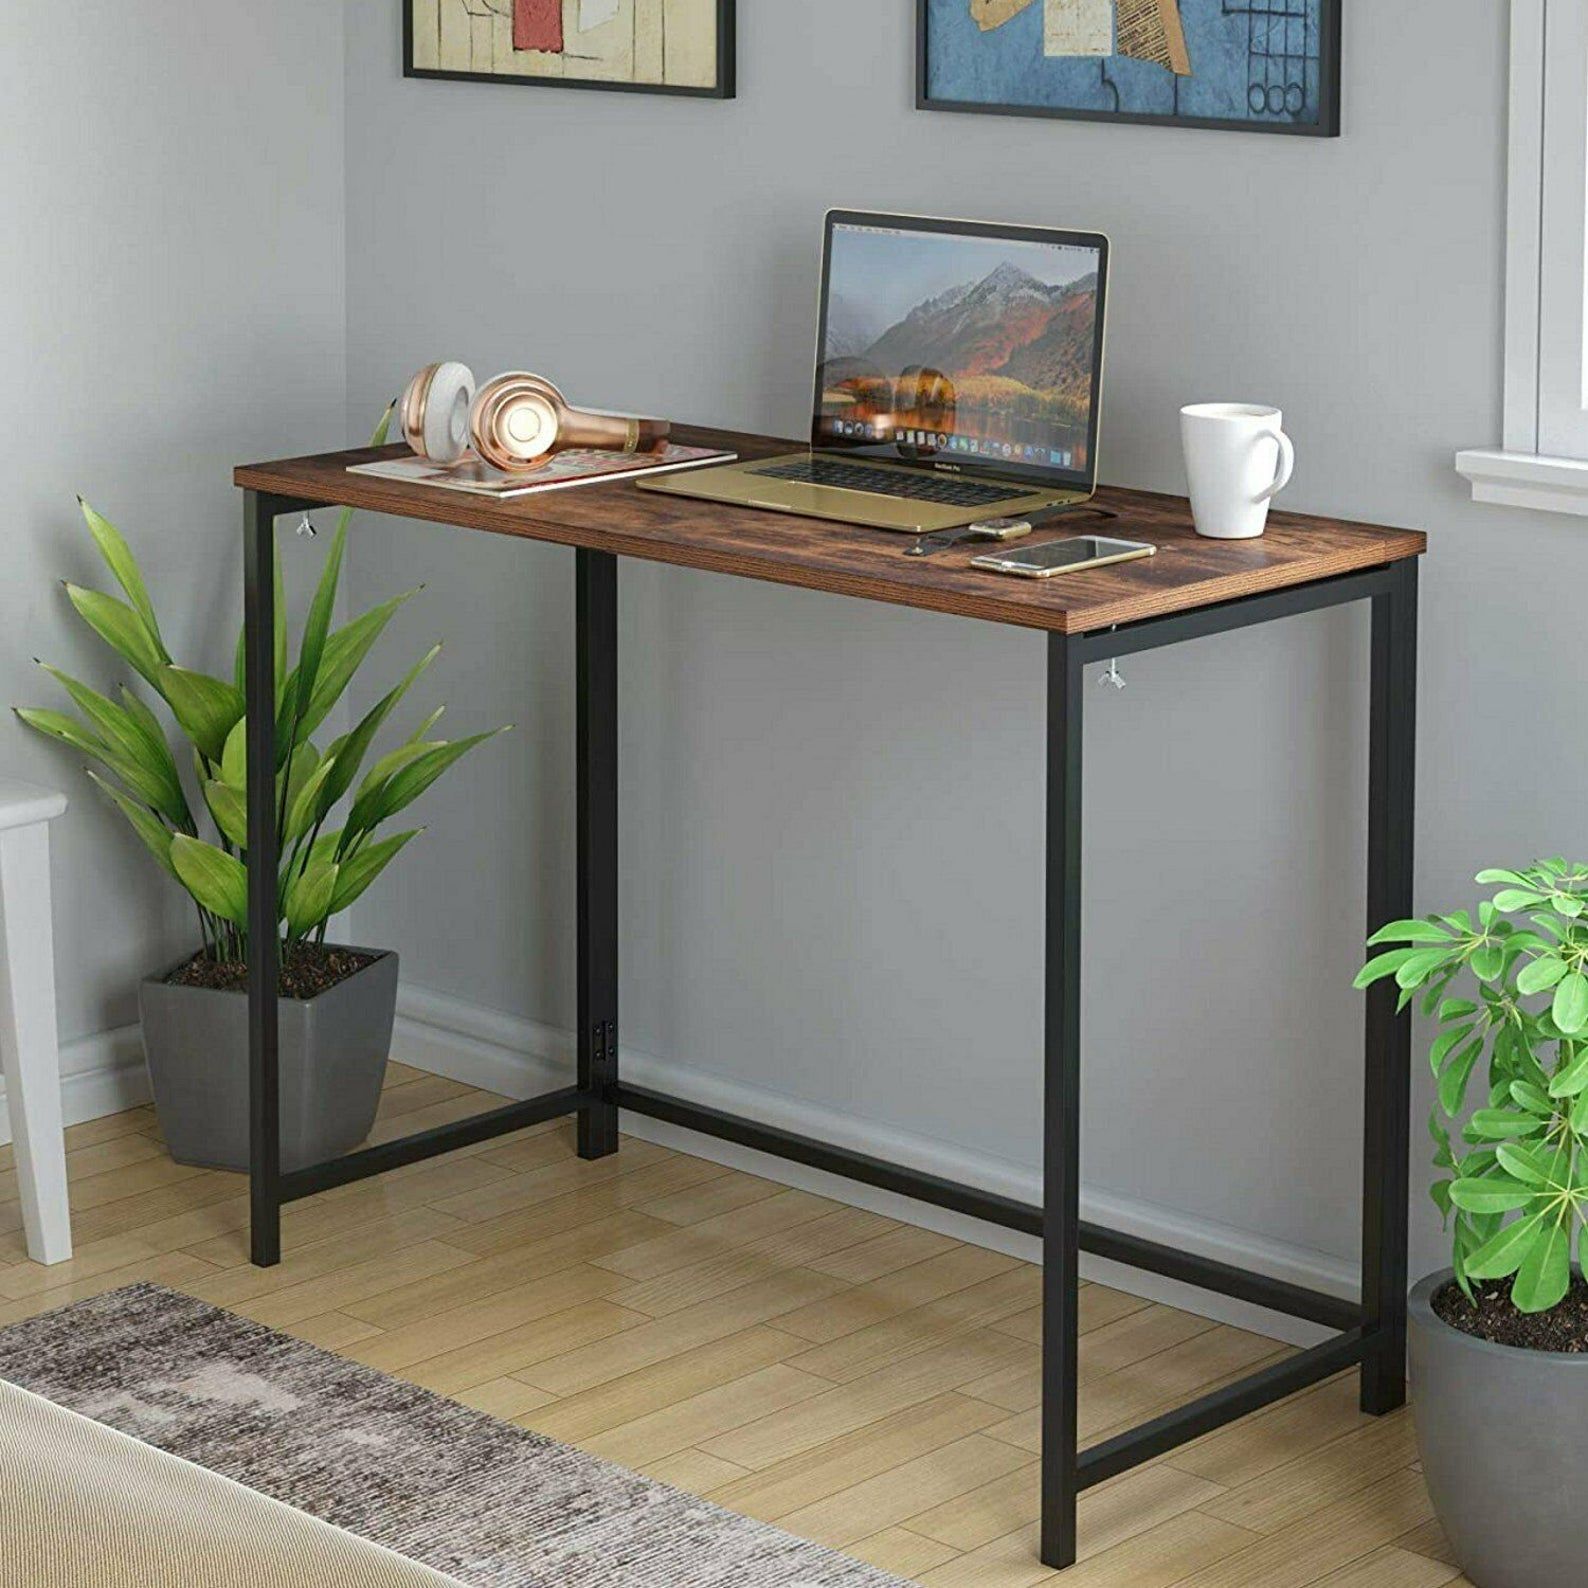 Folding Study Coffee Table Foldable Computer Desk Wooden Laptop Office Tables 